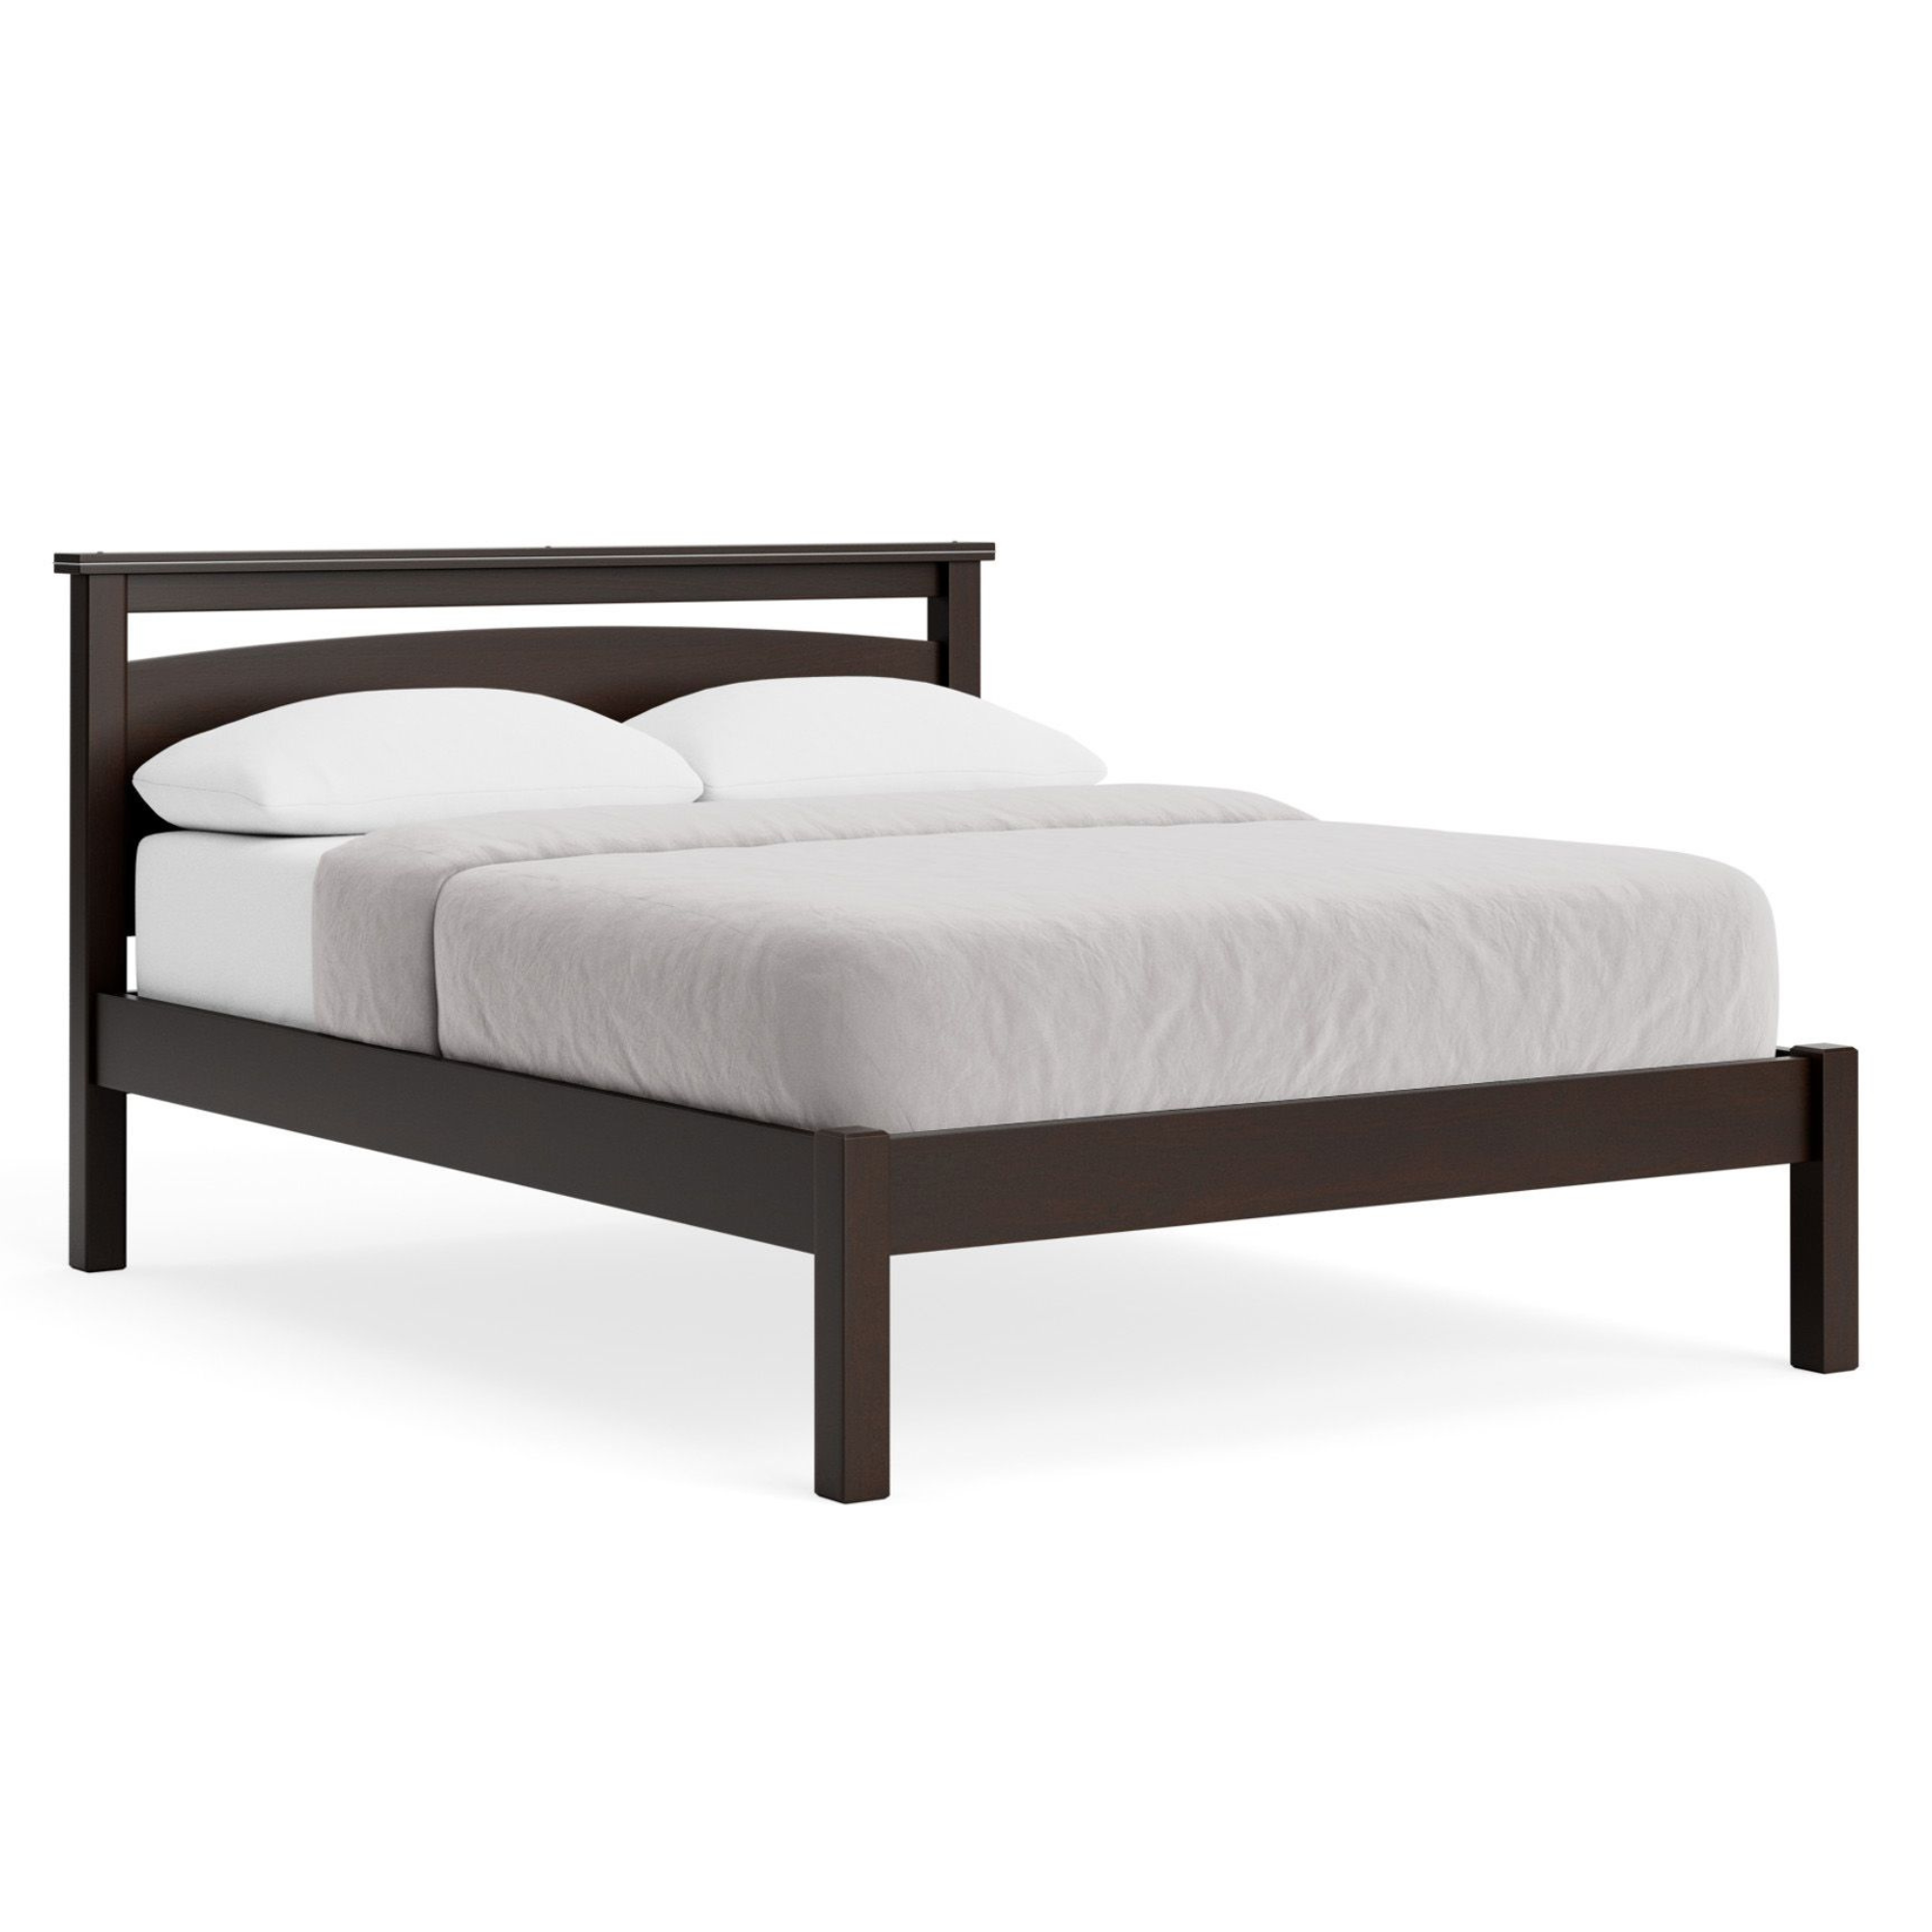 VENIECE SLAT BED LOW FOOT-END | SINGLE TO CALIFORNIAN KING | NZ MADE